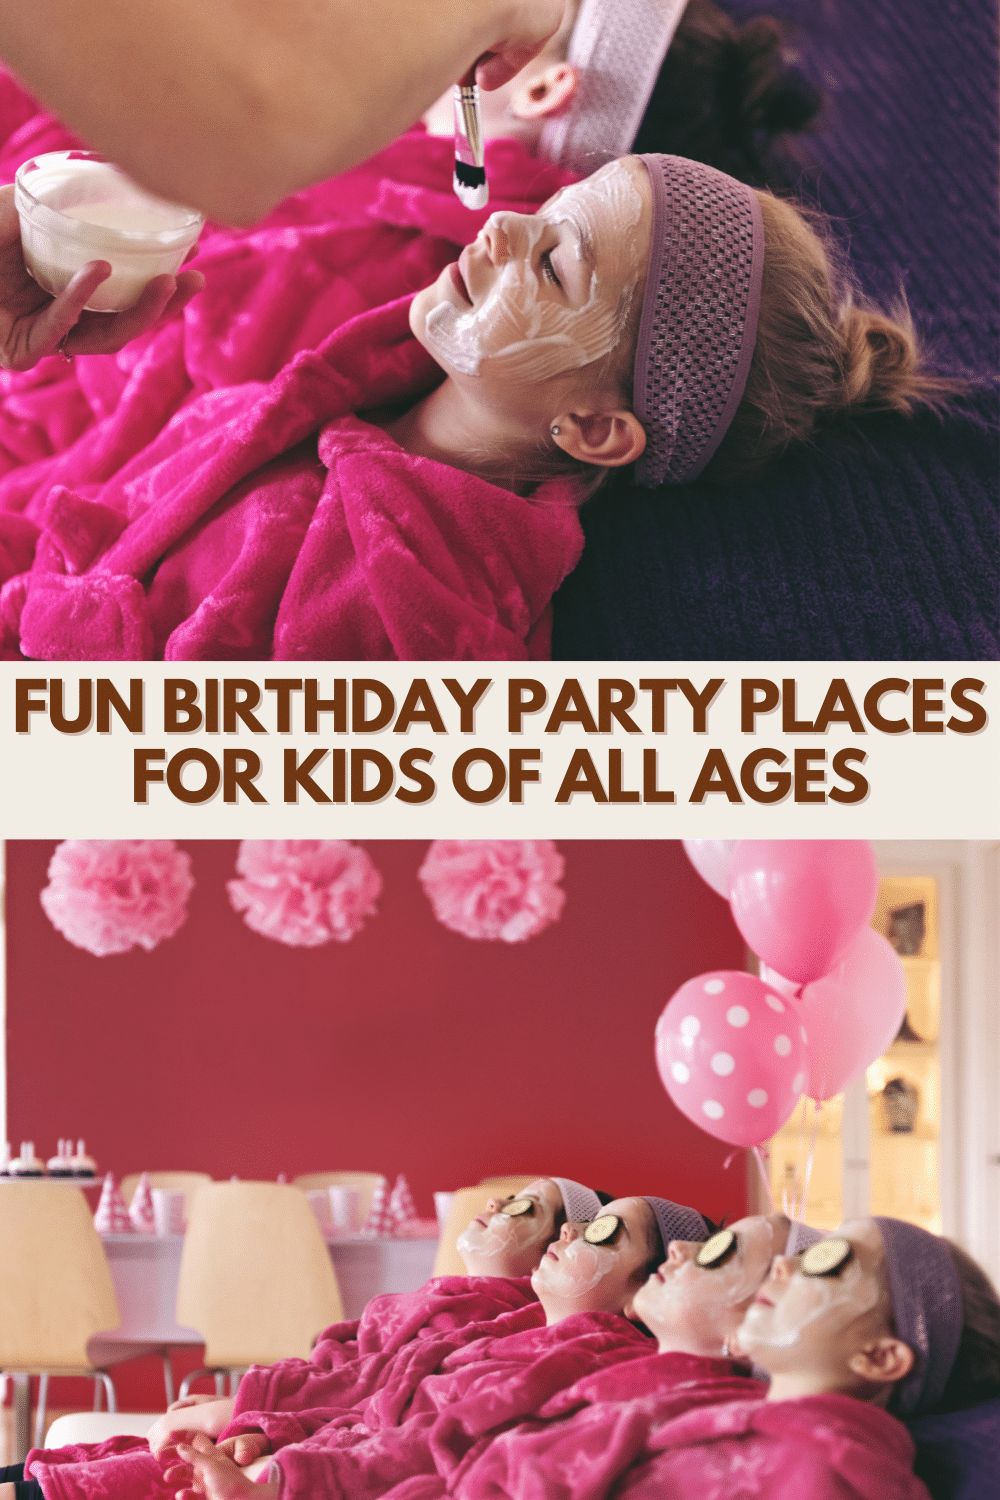 This is a great list of birthday party places for kids from toddlers through teens. These are fun, age-appropriate locations perfect for groups! #birthdayparty #birthdaypartyplaces #teens #toddlers via @wondermomwannab